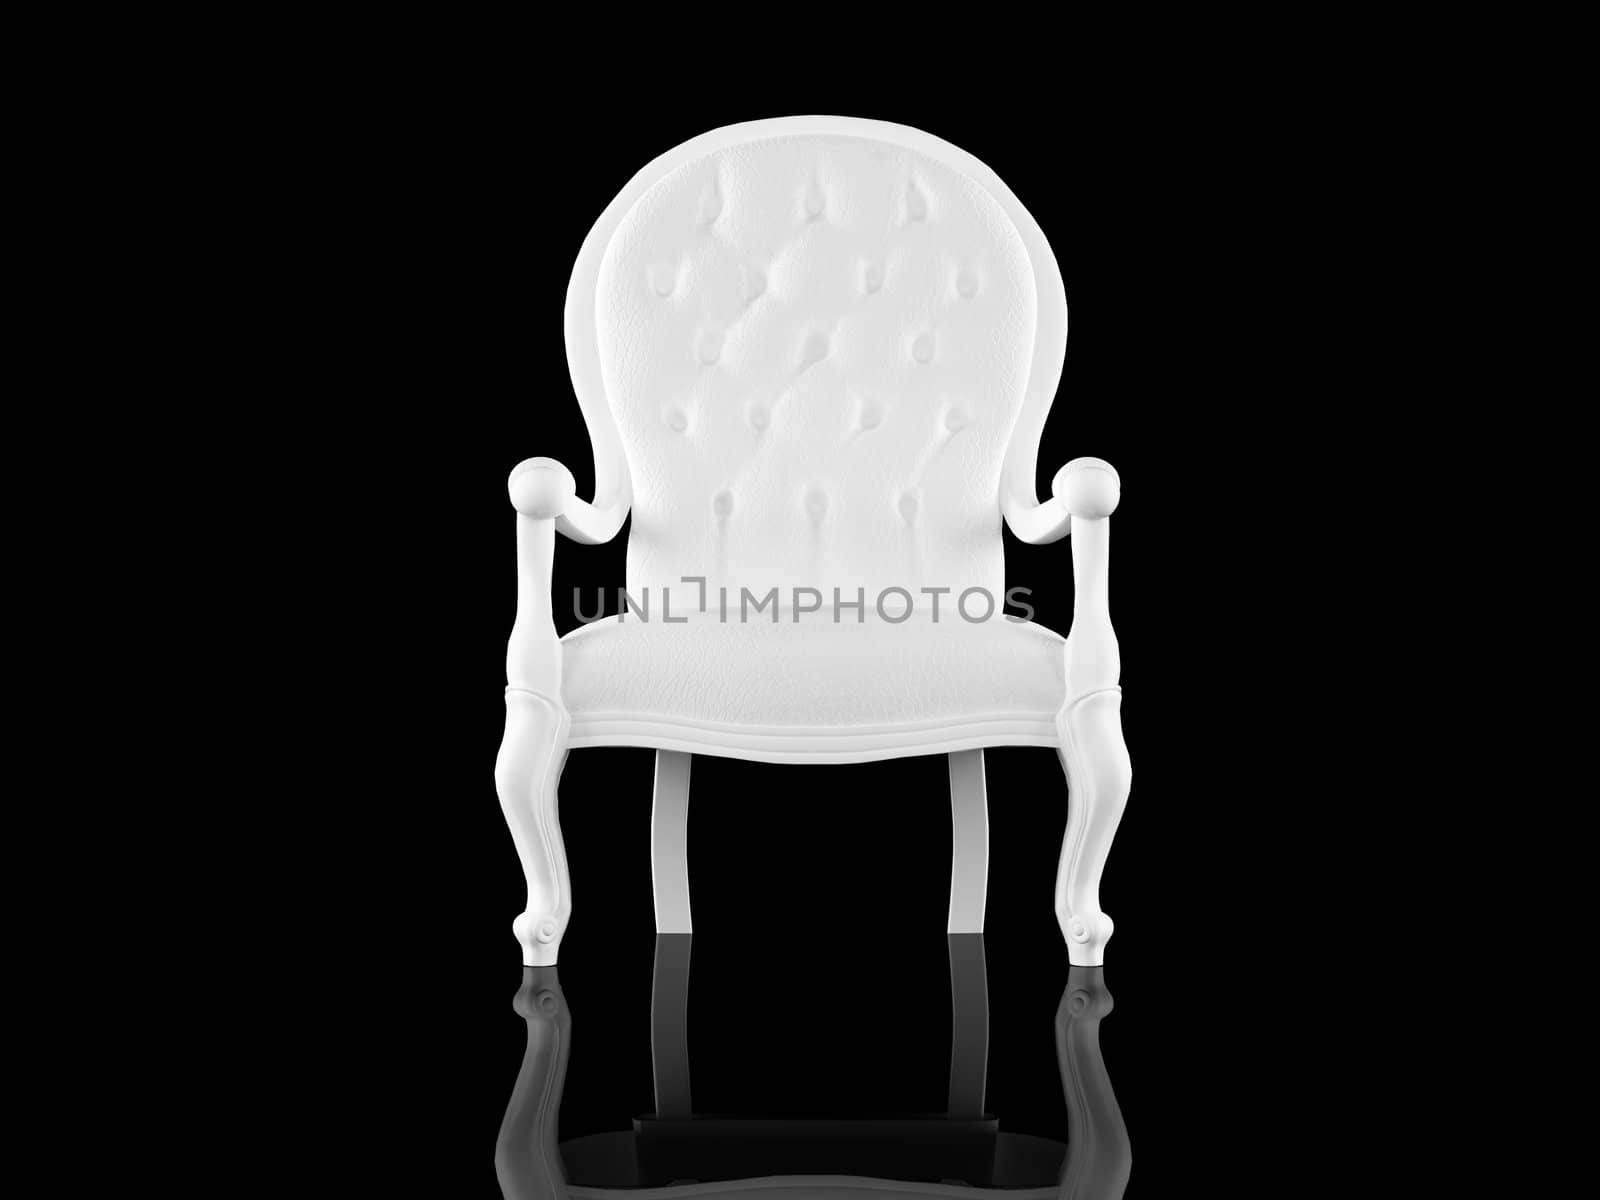 White armchair by rook